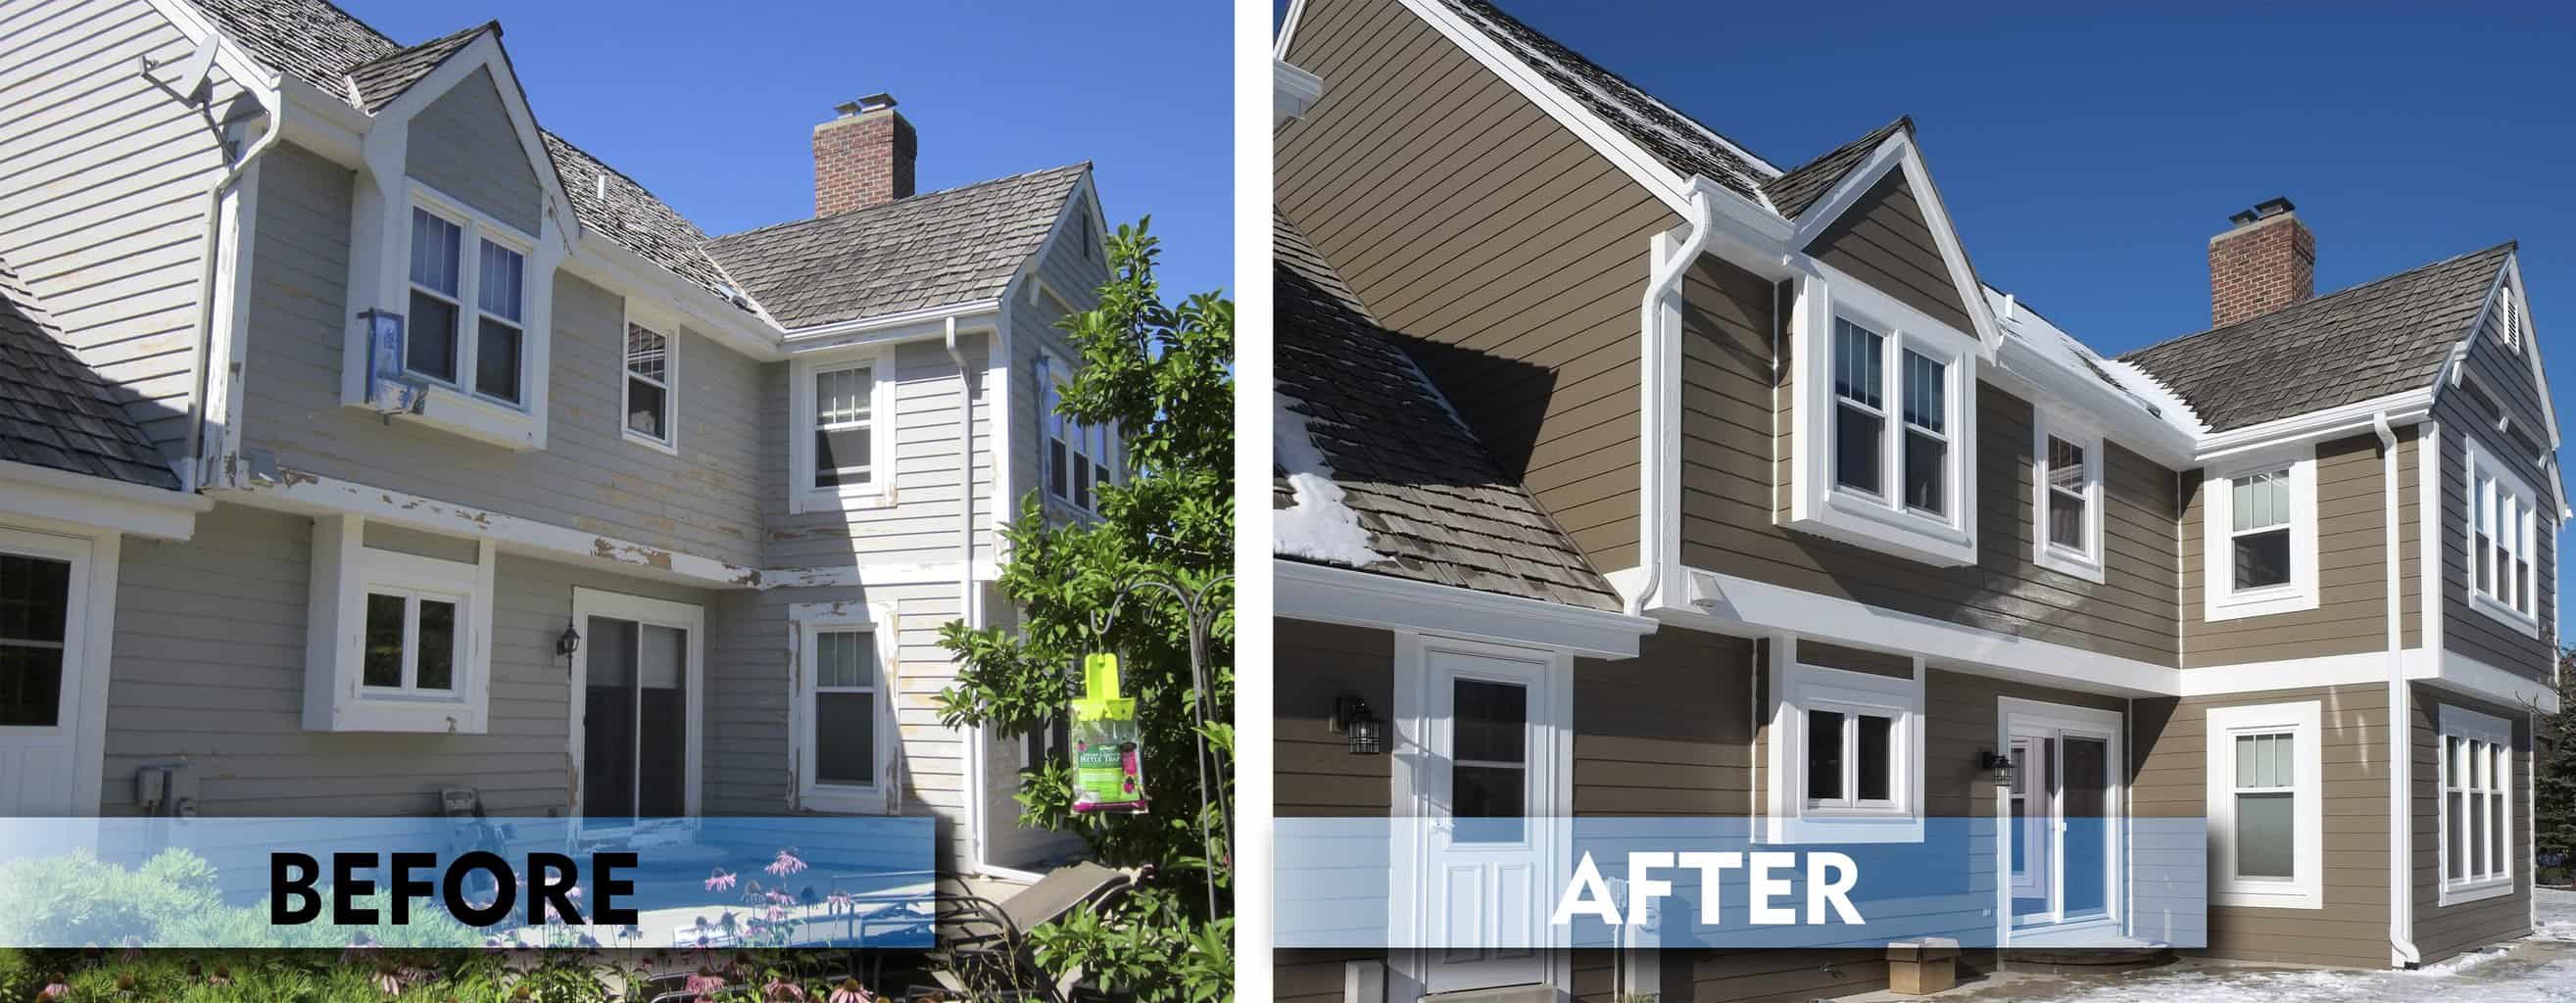 Image shows a collage of before and after photos highlighting new siding on a home. 